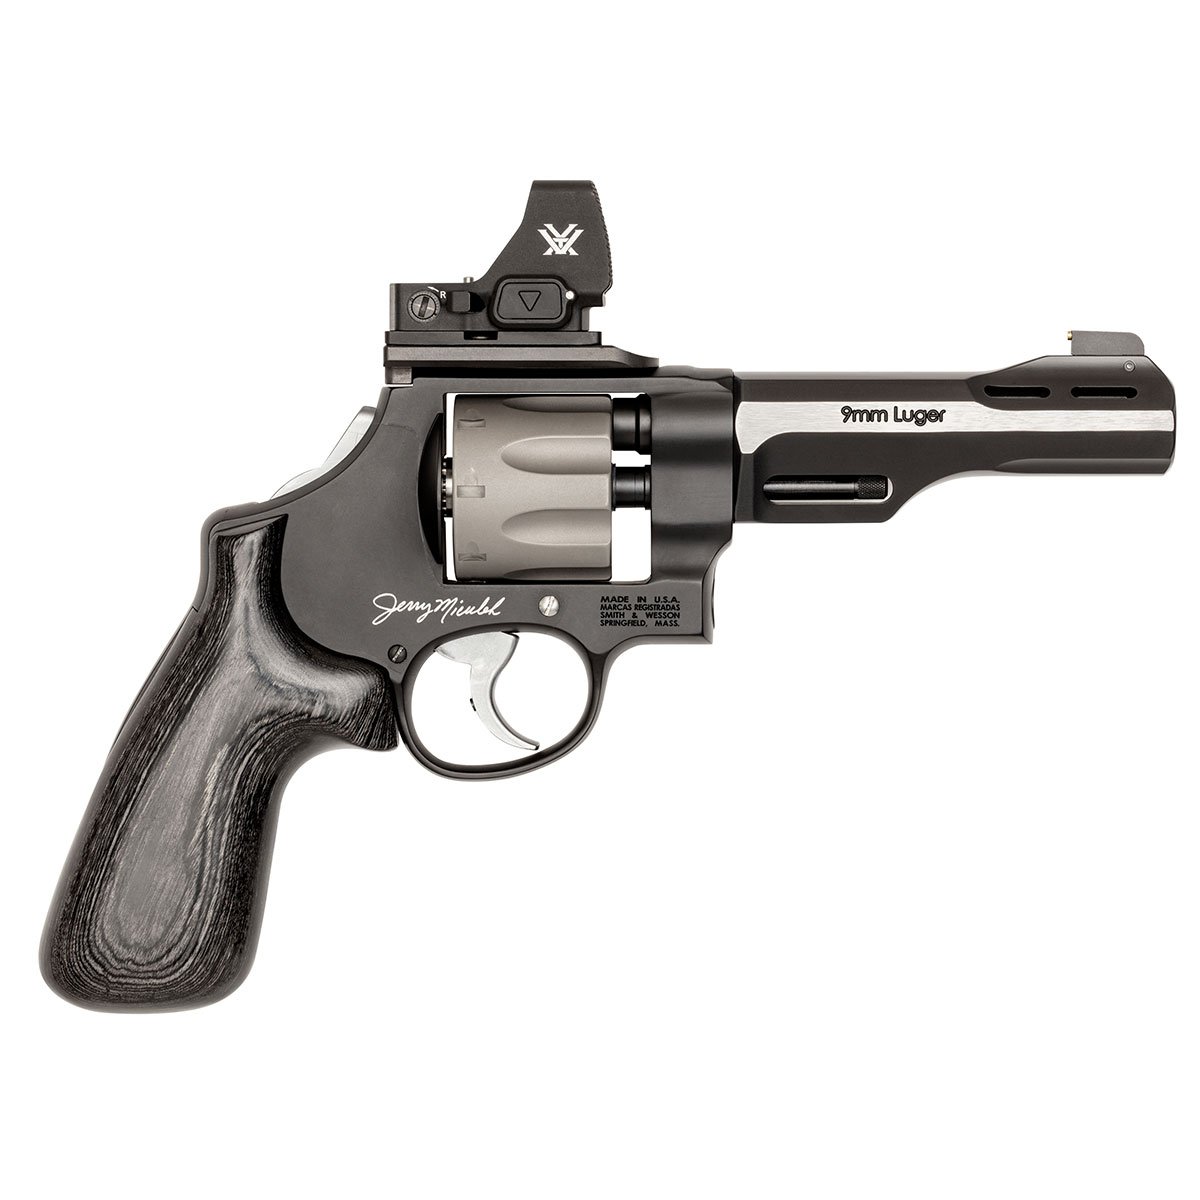 SMITH & WESSON - PERFORMANCE CENTER MODEL 327 JERRY MICULEK 9MM LUGER REVOLVER